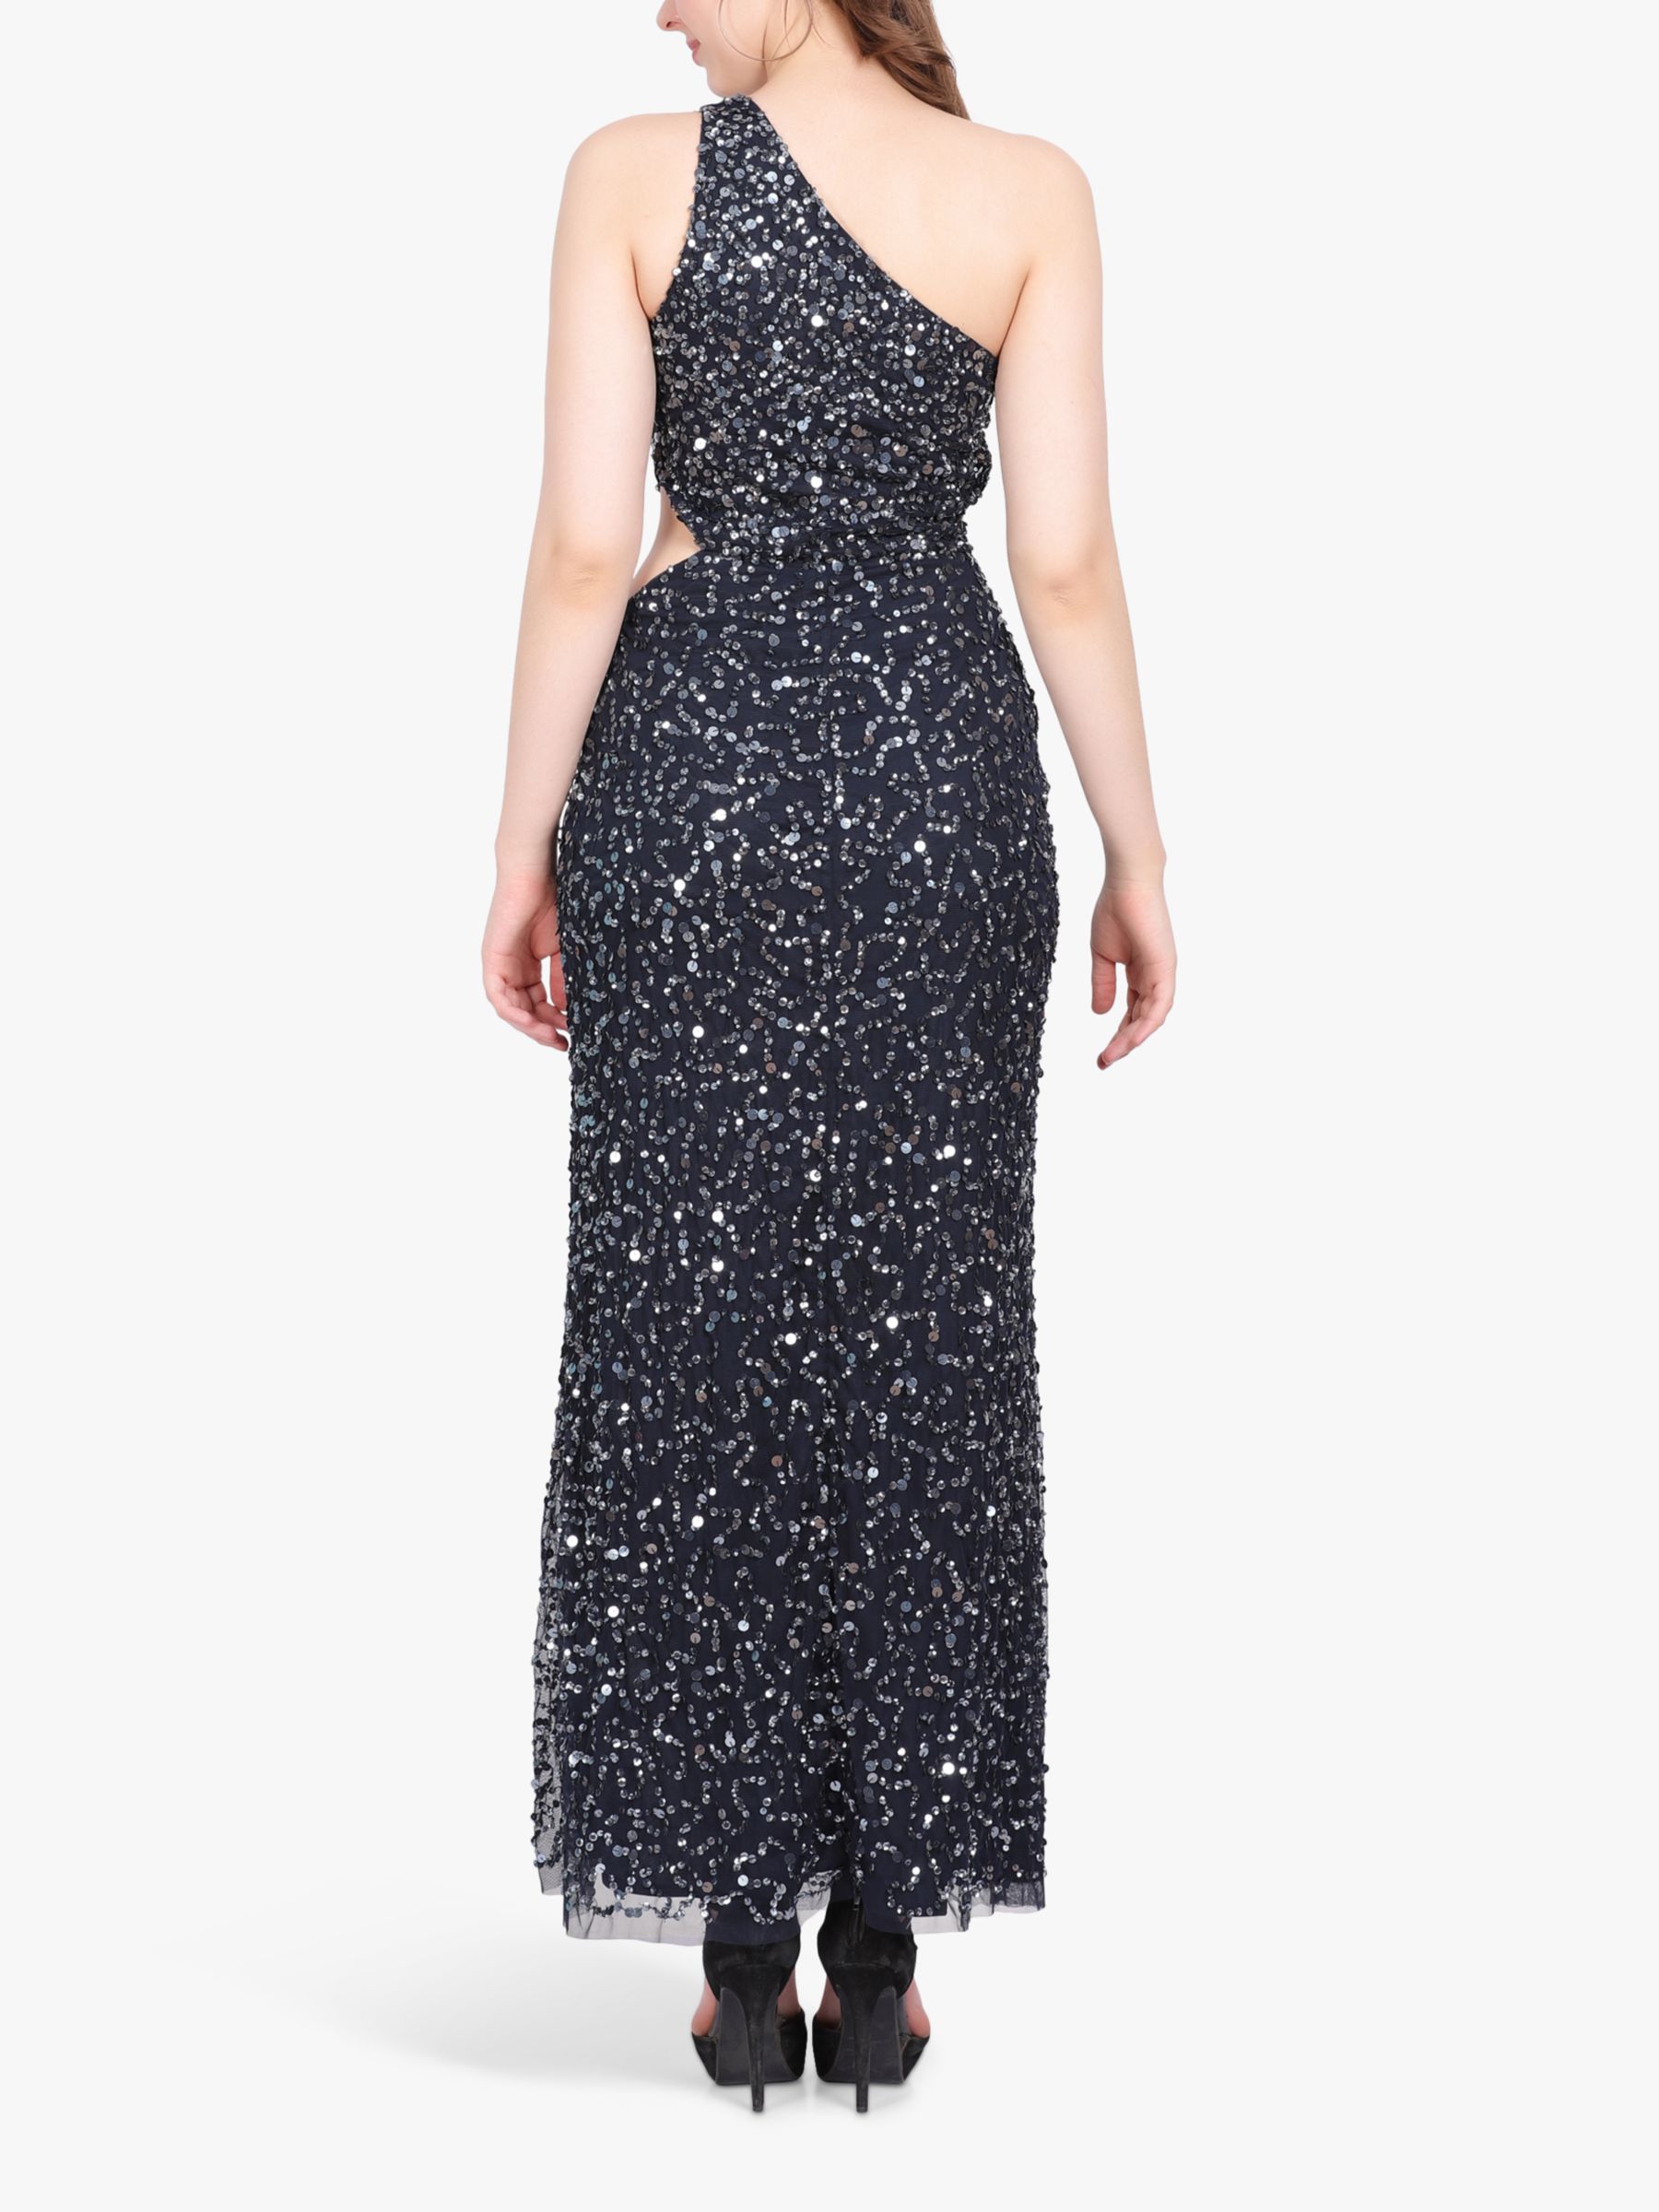 Lace & Beads Naeve Sequin One Shoulder Maxi Dress, Navy, 10